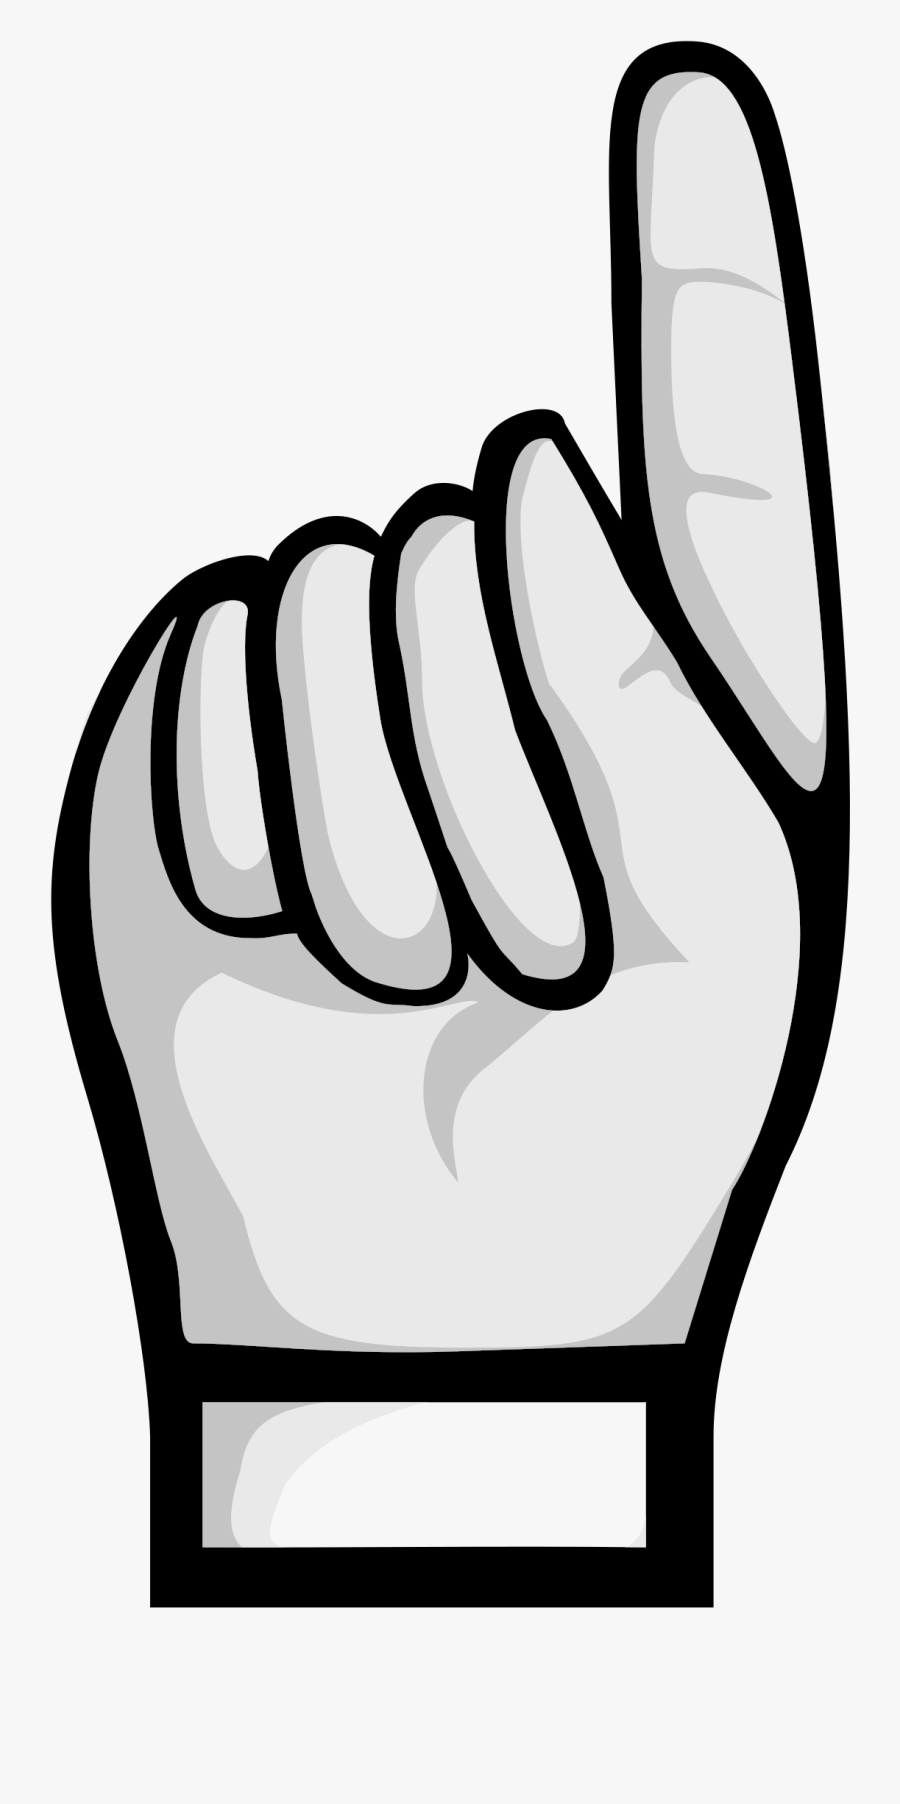 Hand Clipart Muscular - Hand Pointing Up Clipart, Transparent Clipart